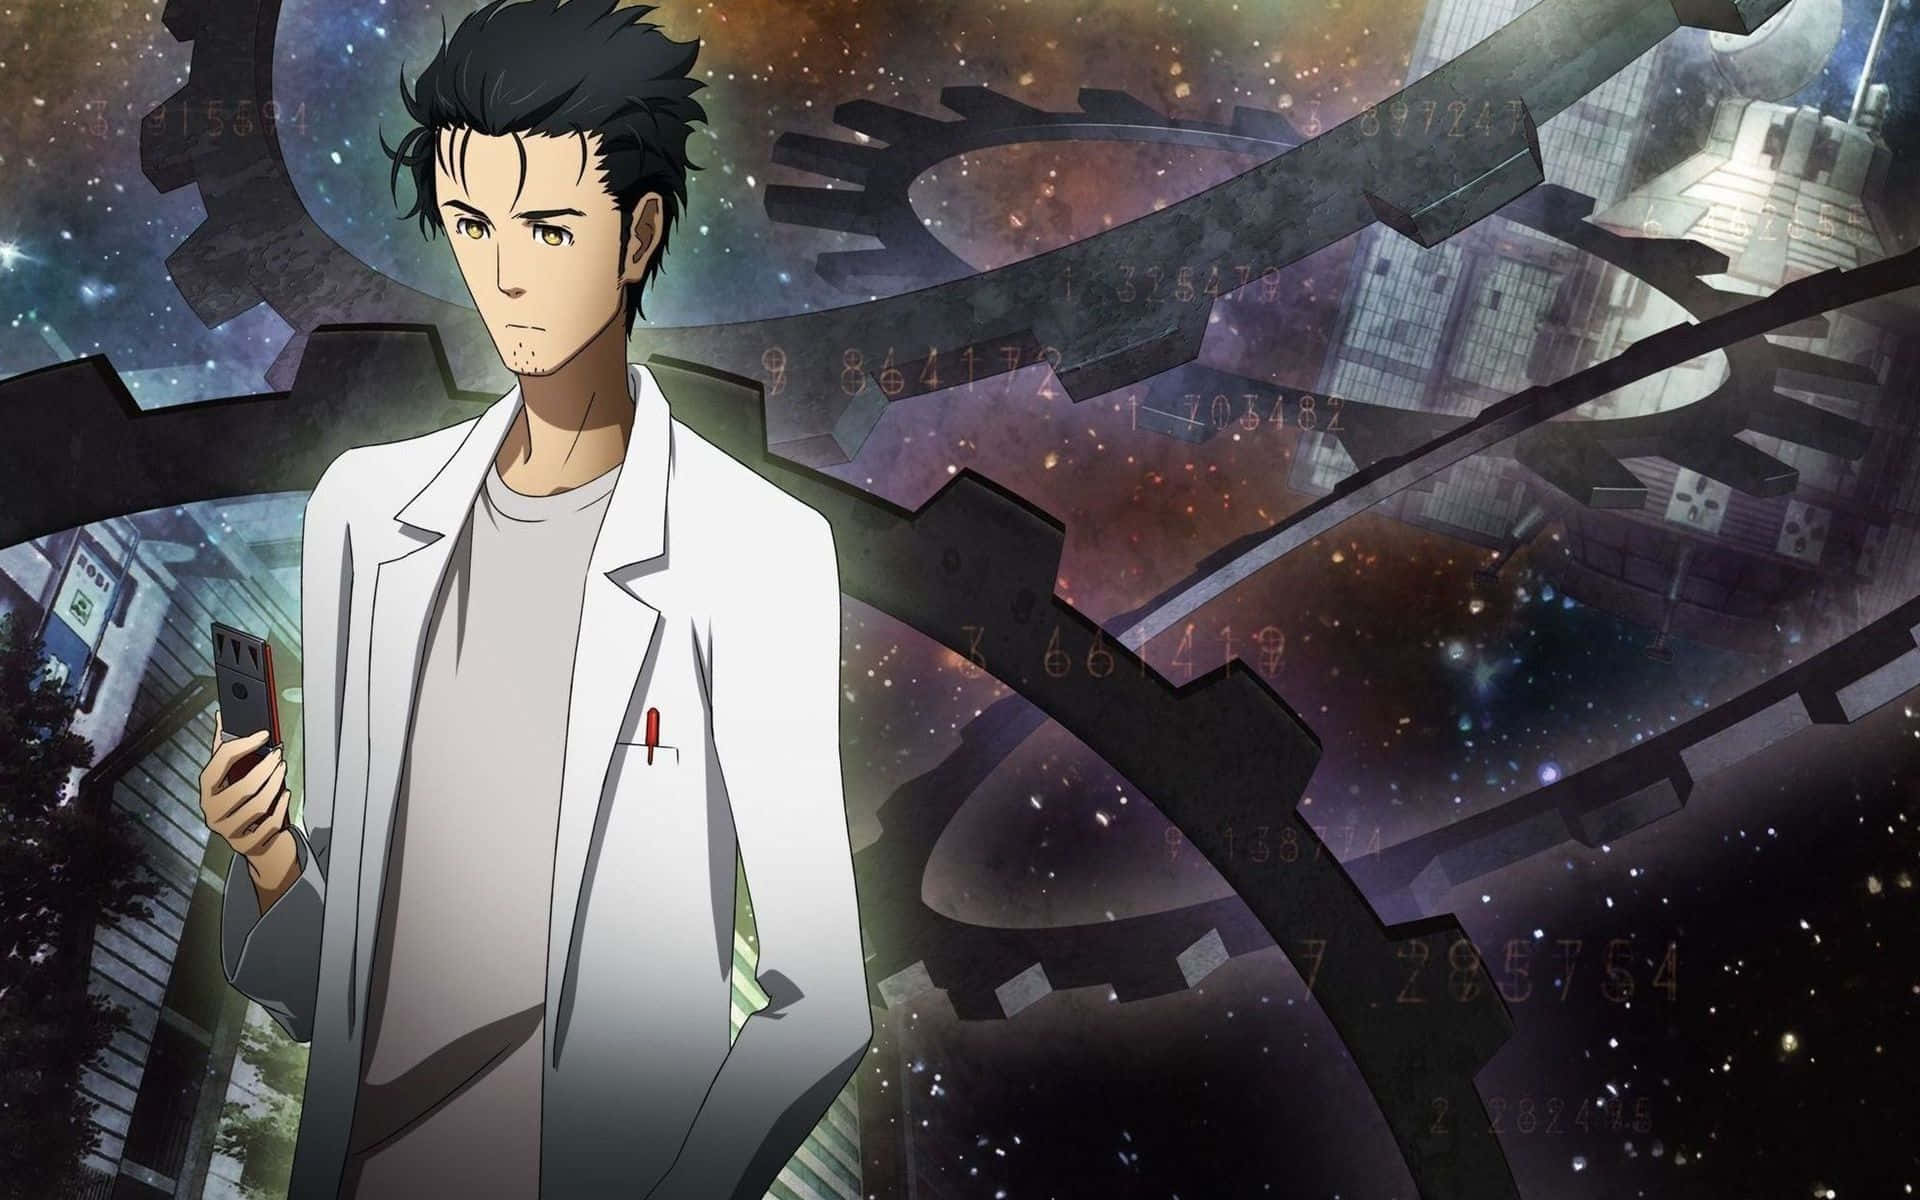 Rintaro Okabe, the Eccentric Mad Scientist from Steins;Gate in a Reflective Moment Wallpaper